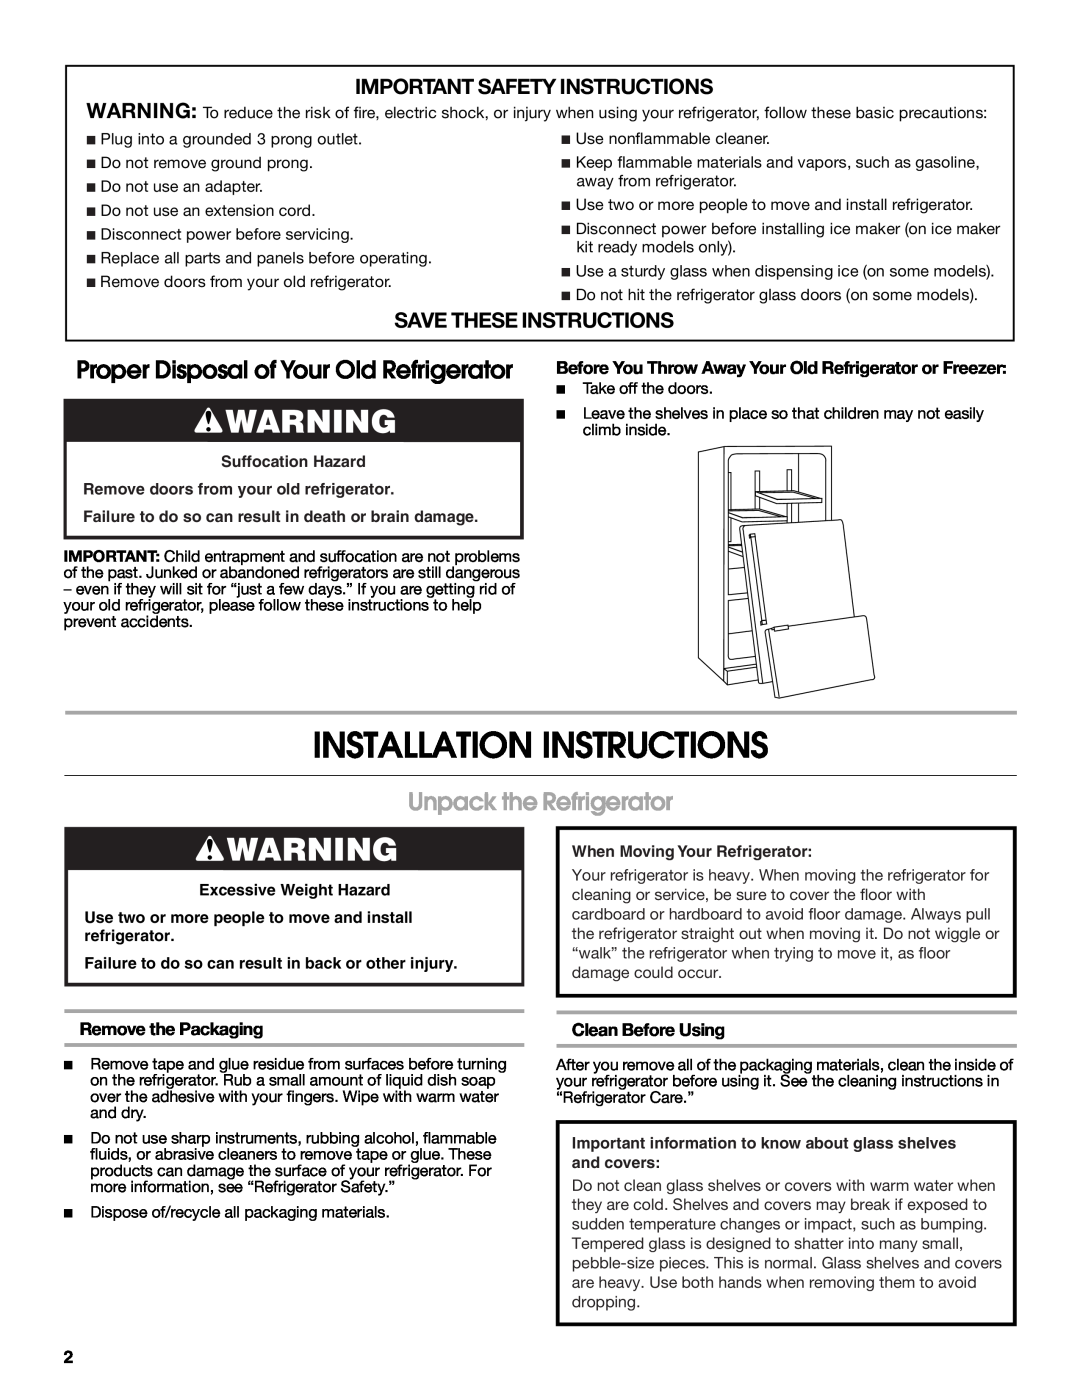 Jenn-Air W10276070A Installation Instructions, Proper Disposal of Your Old Refrigerator, Unpack the Refrigerator 